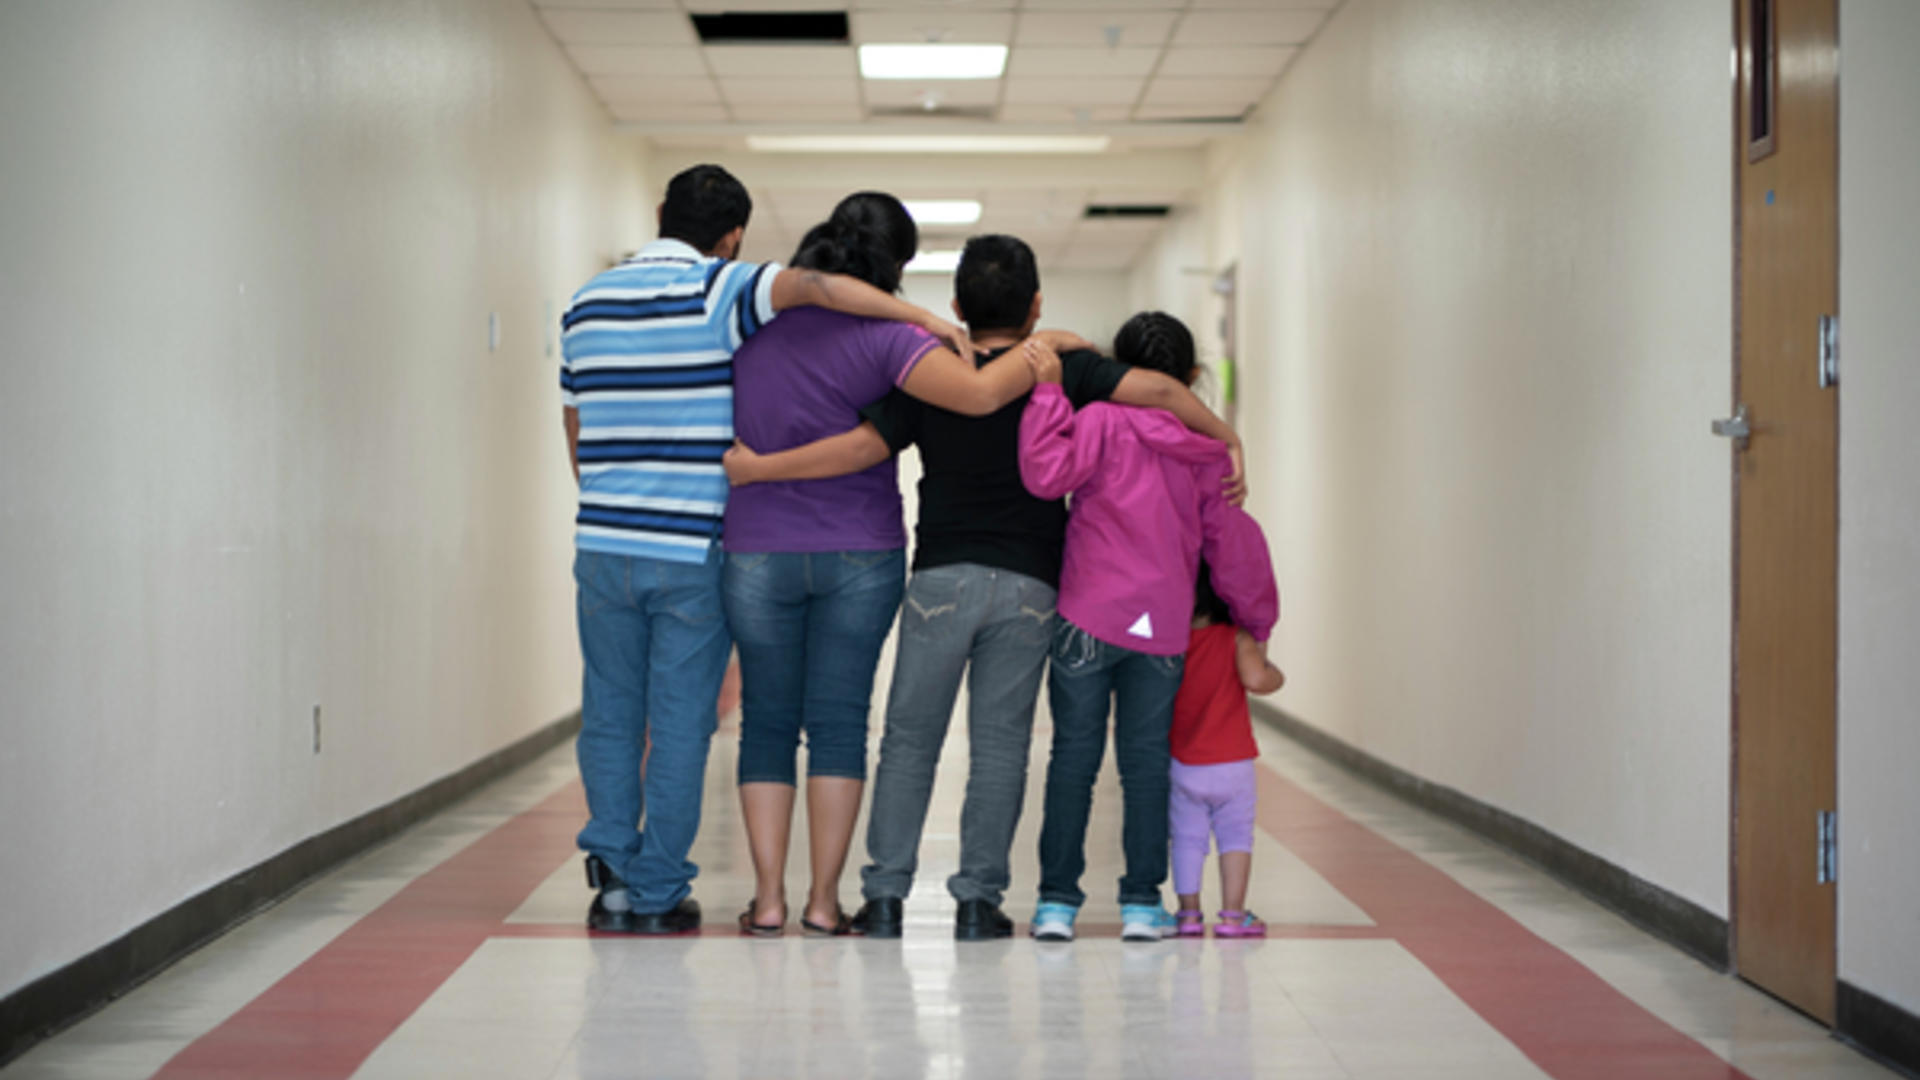 An asylum-seeking family from Central America at an International Rescue Committee welcome center shelter in Phoenix, Arizona.